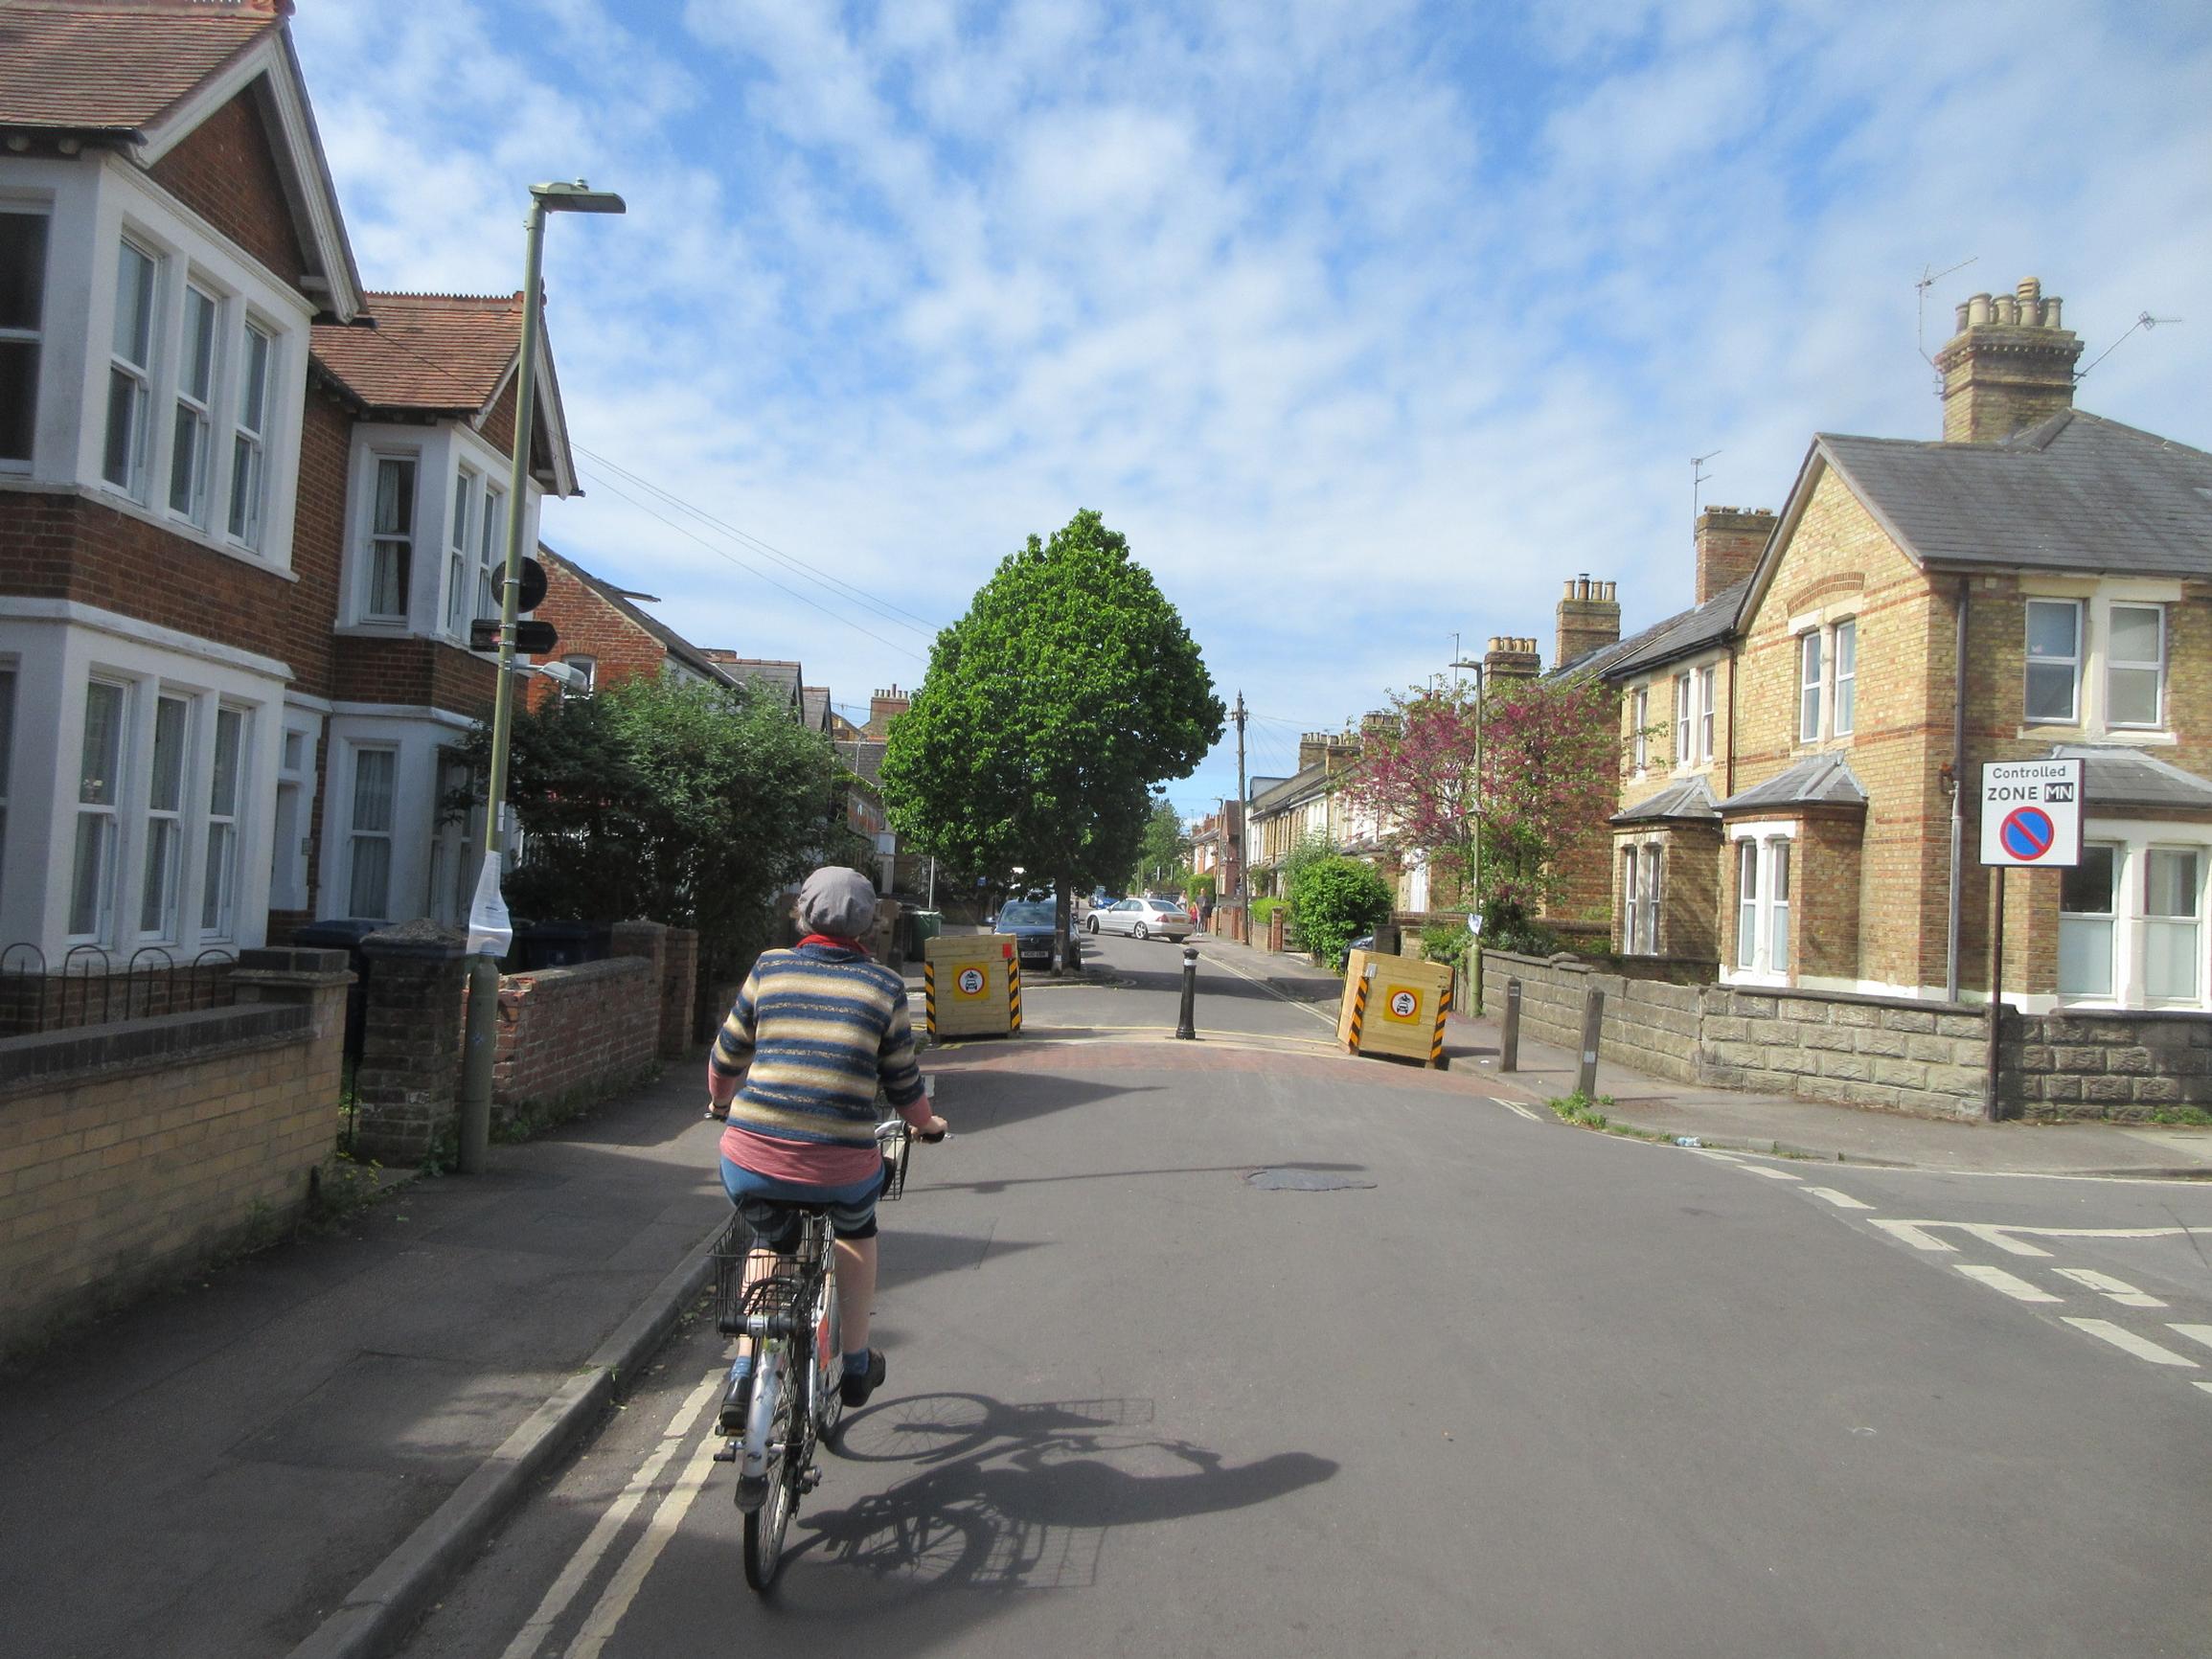 One of the new Low Traffic Neighbourhoods in East Oxford